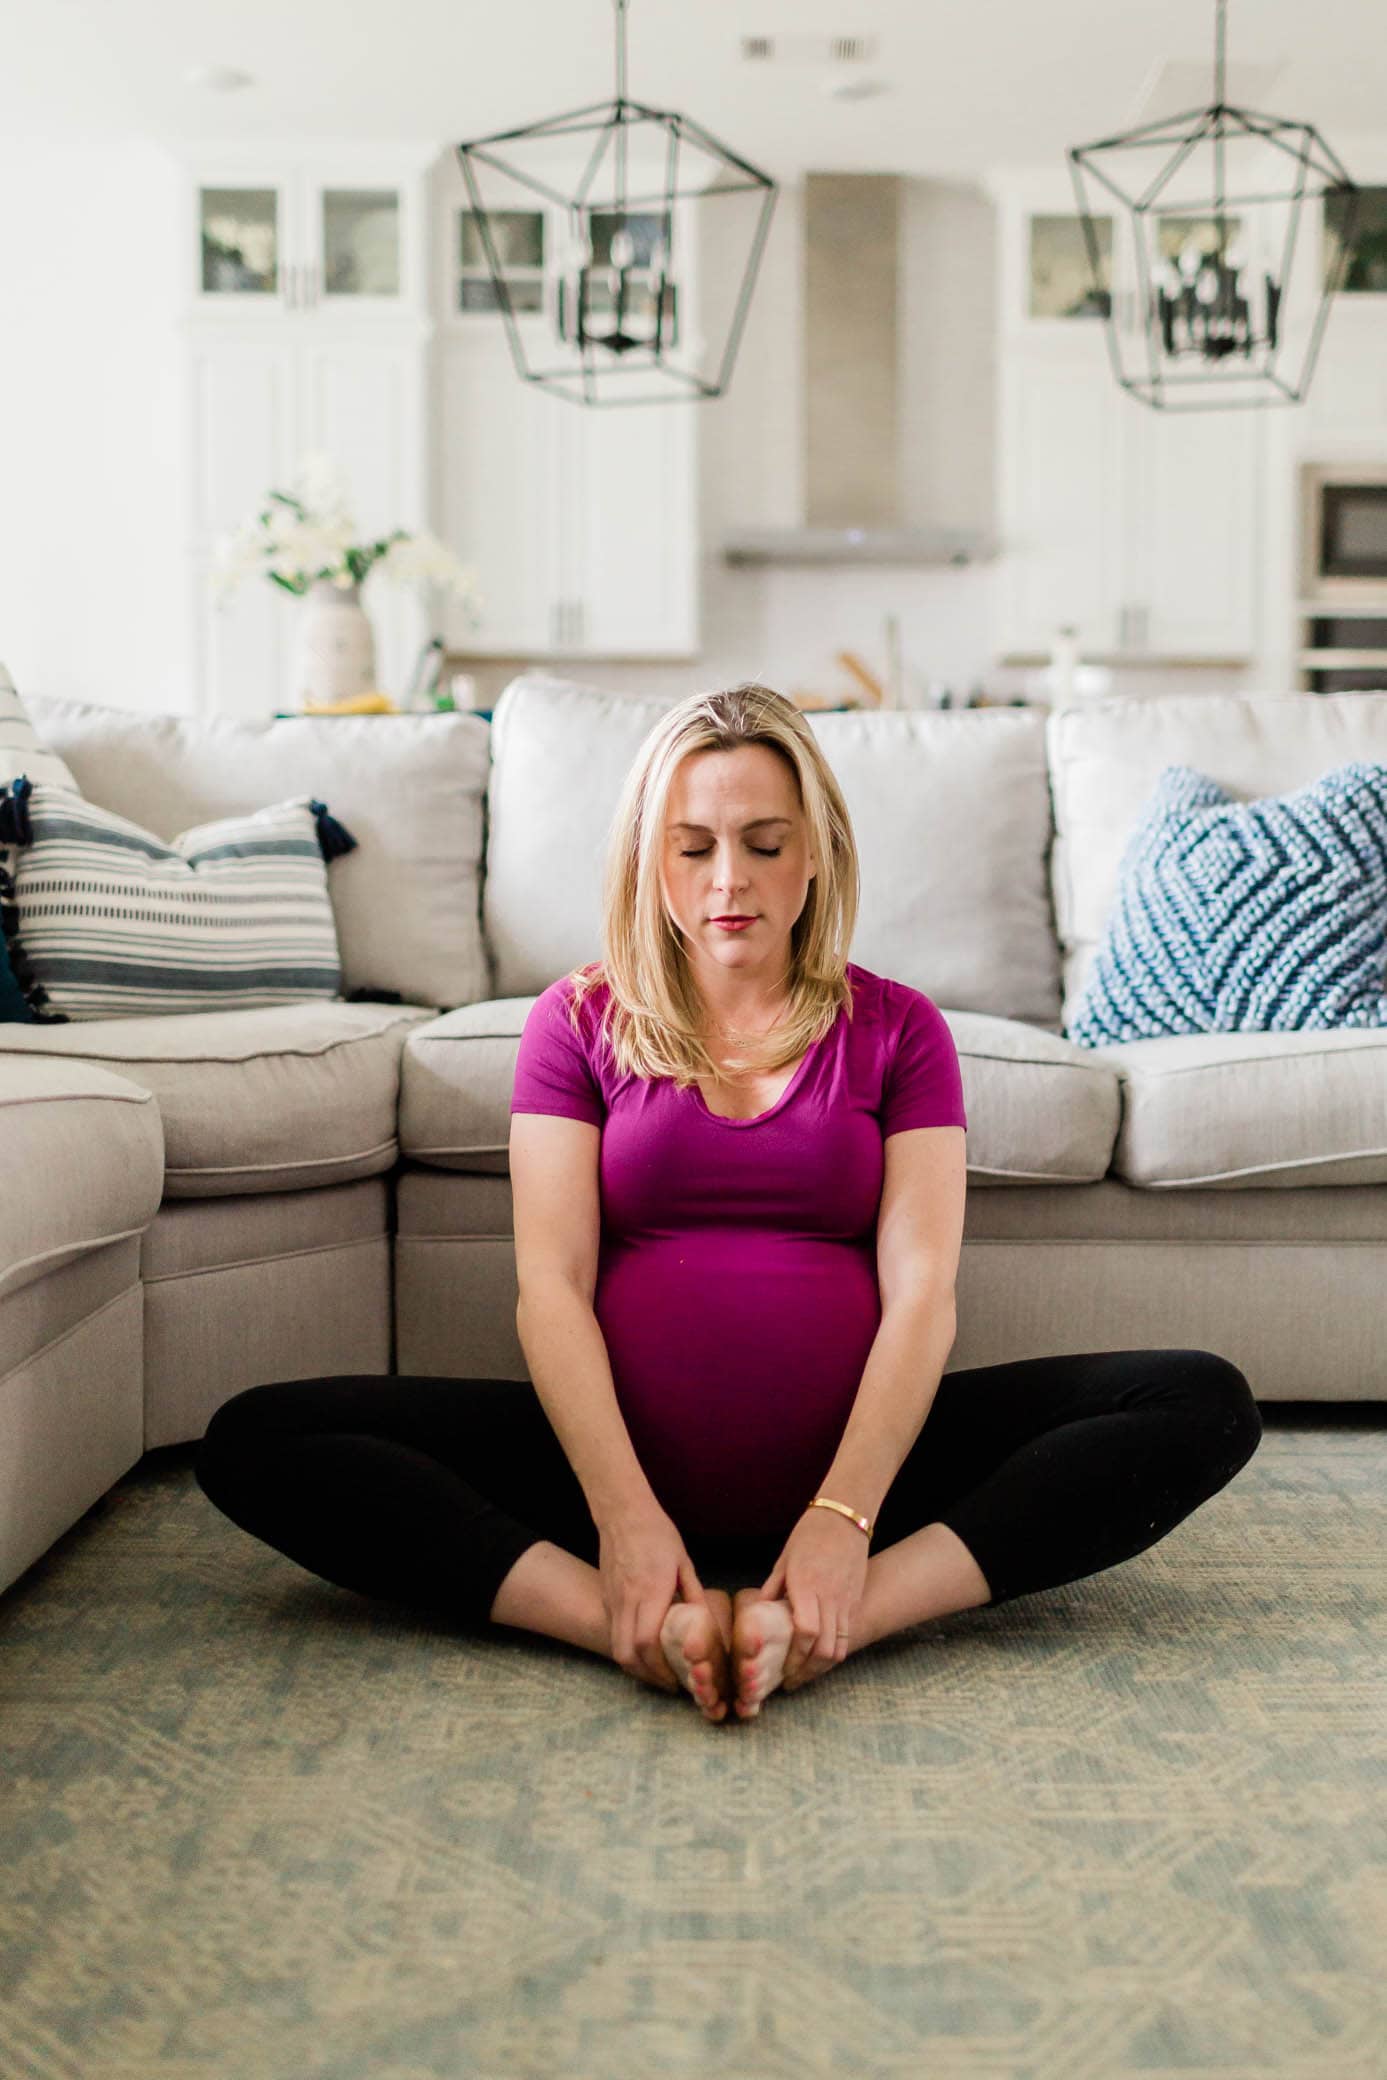 Pregnant woman doing the Bound angle pose